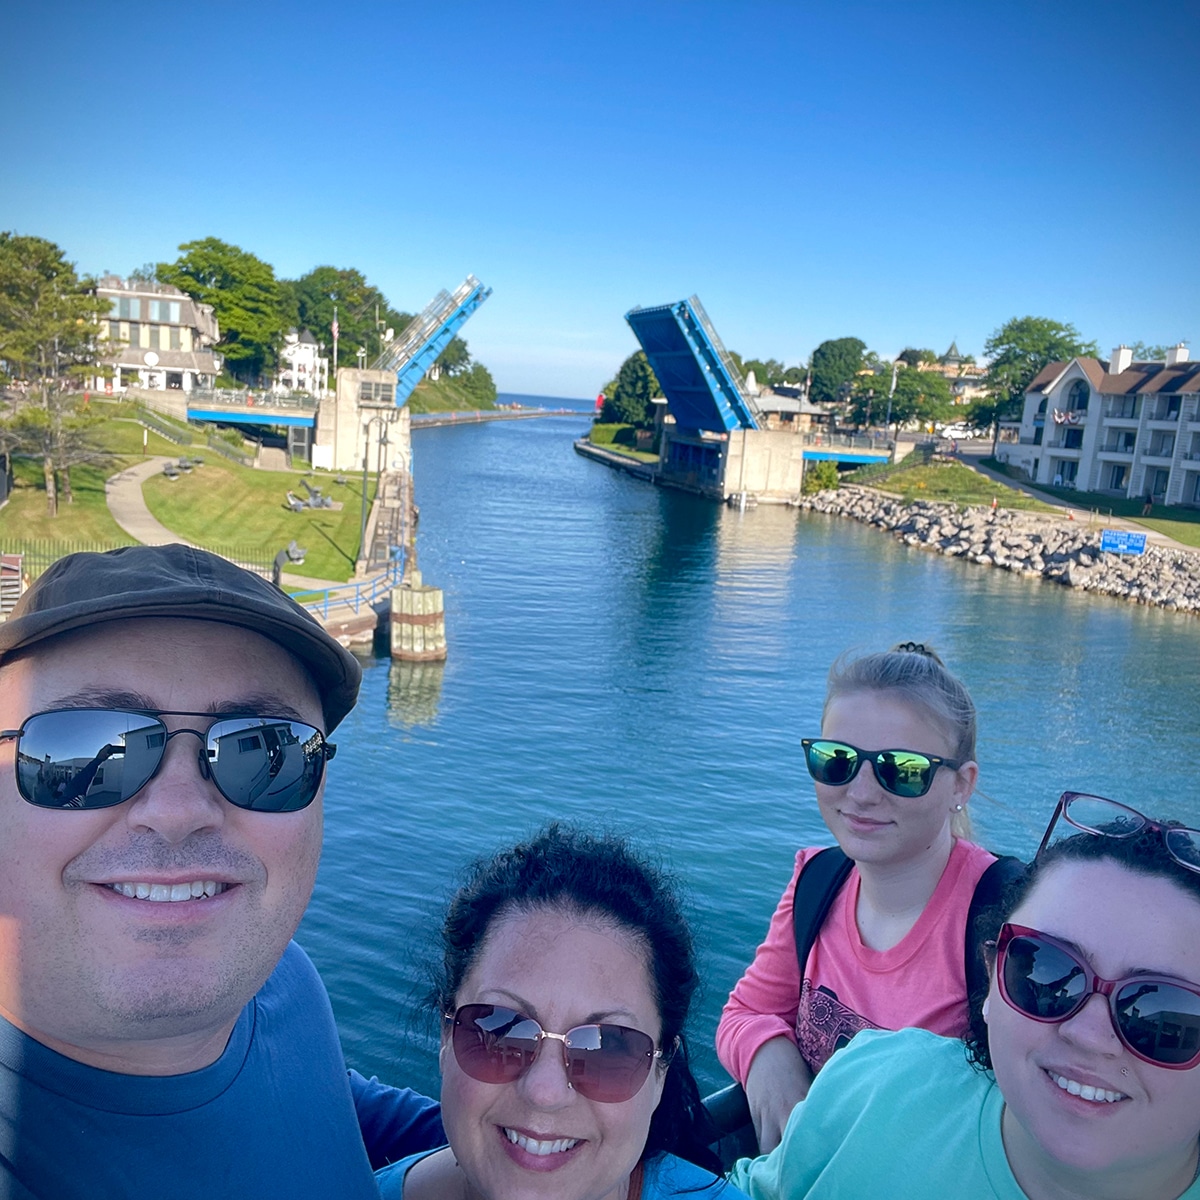 Steve and I with our daughter and niece on a ferry to Beaver Island as it leaves the coast of Charlevoix. In the background, you can see the drawbridge opening up for our passage.